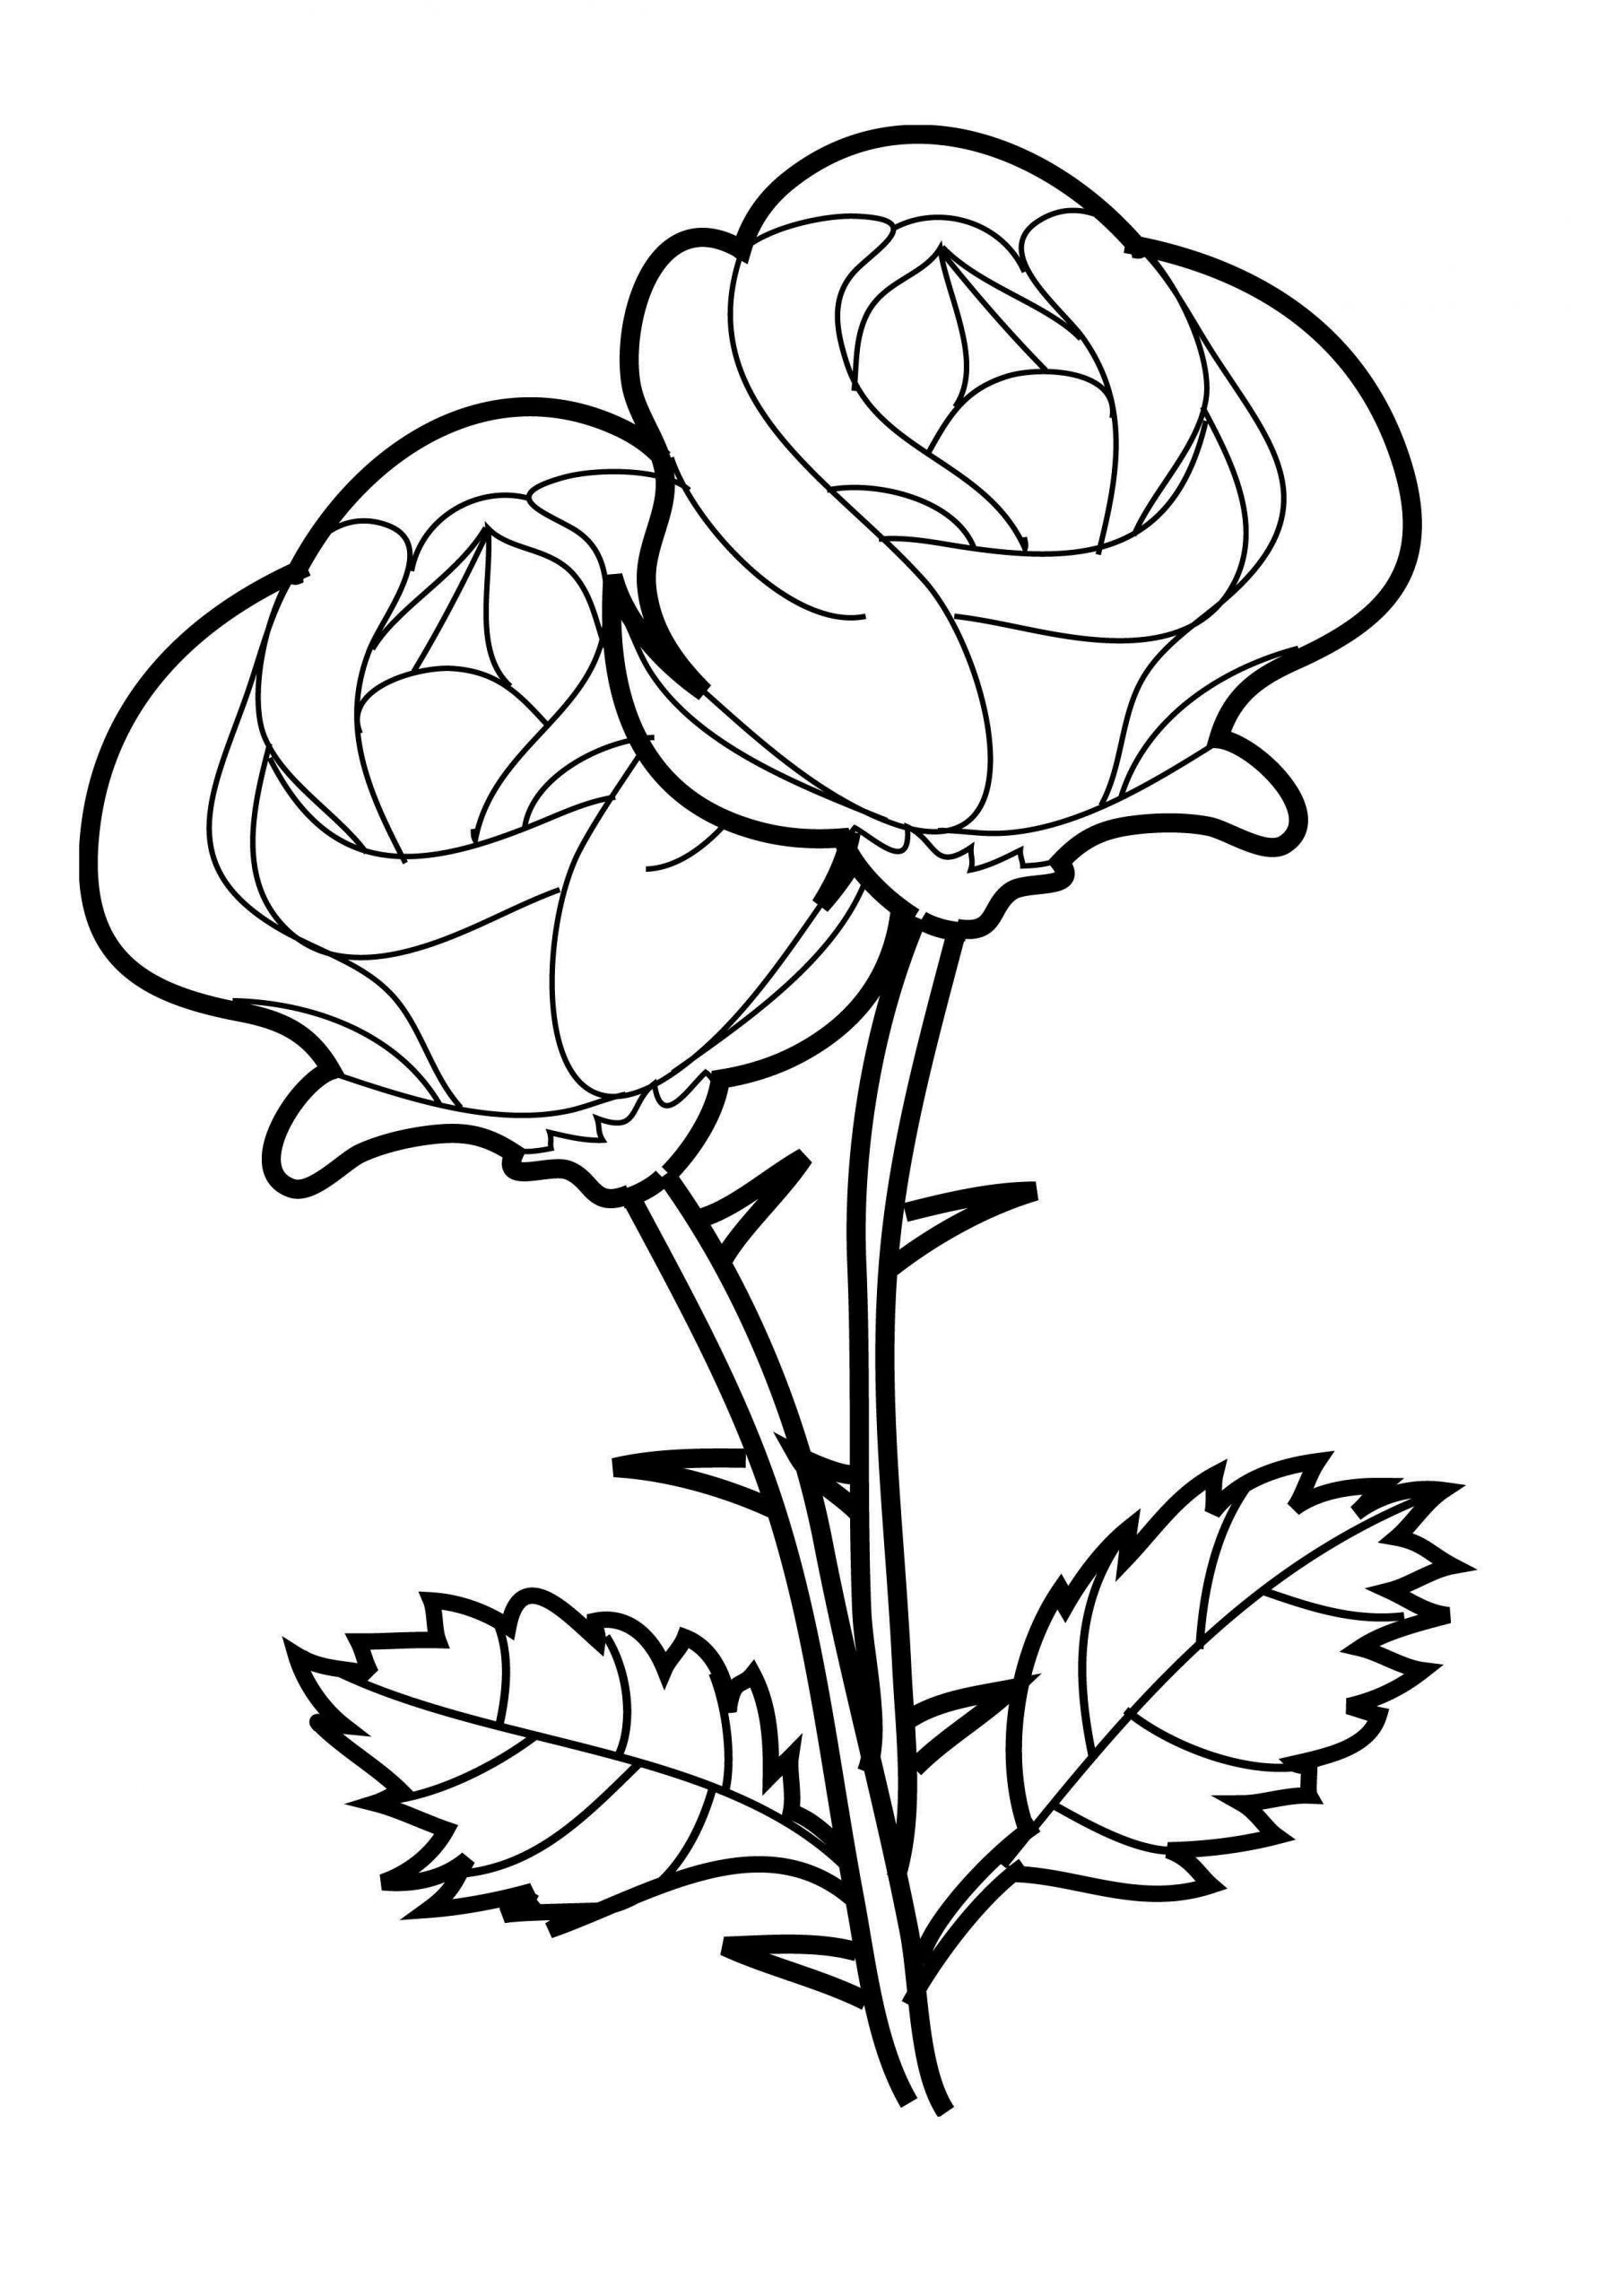 Free Coloring Pages For Girls Flowers
 Flower Coloring Pages